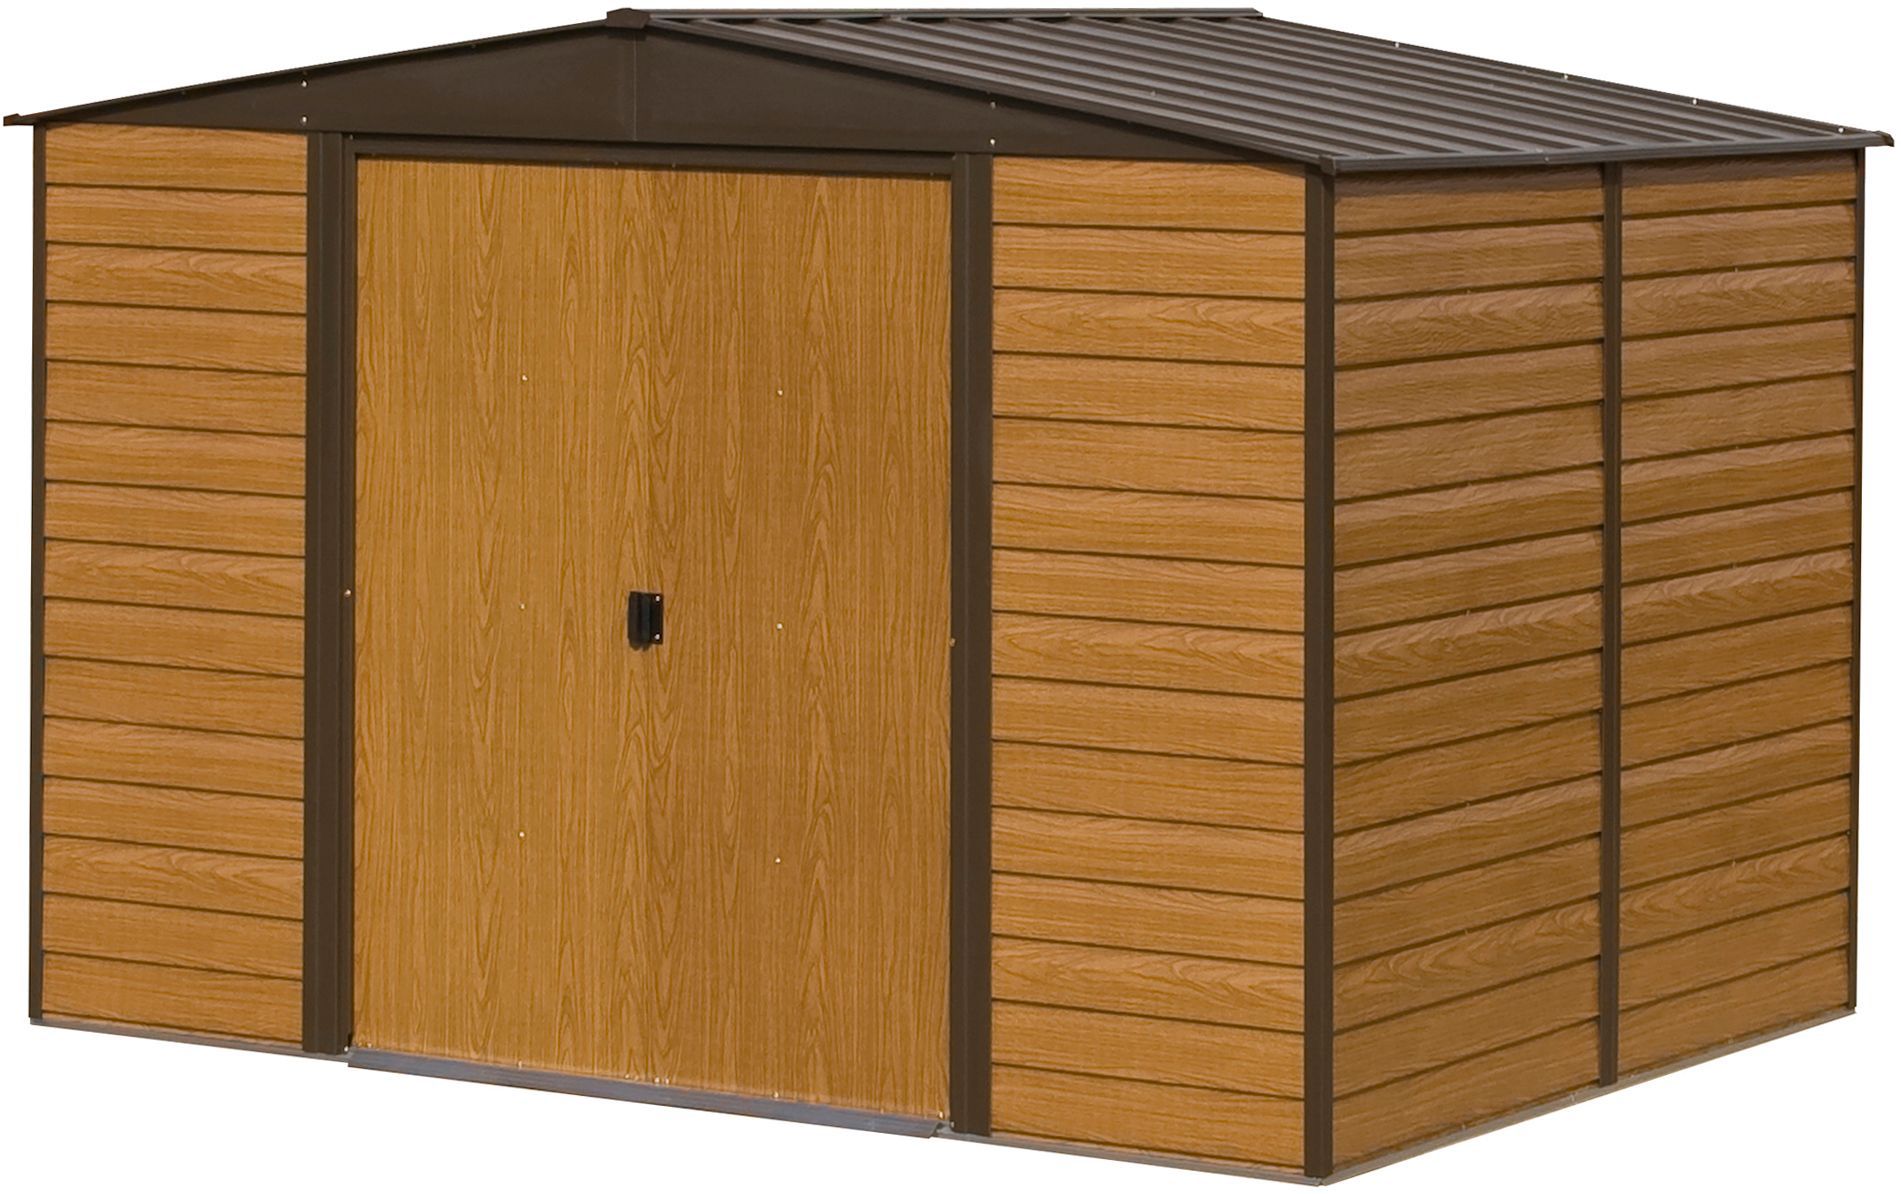 Arrow Woodvale 12x10 Apex Metal Shed - Assembly service included